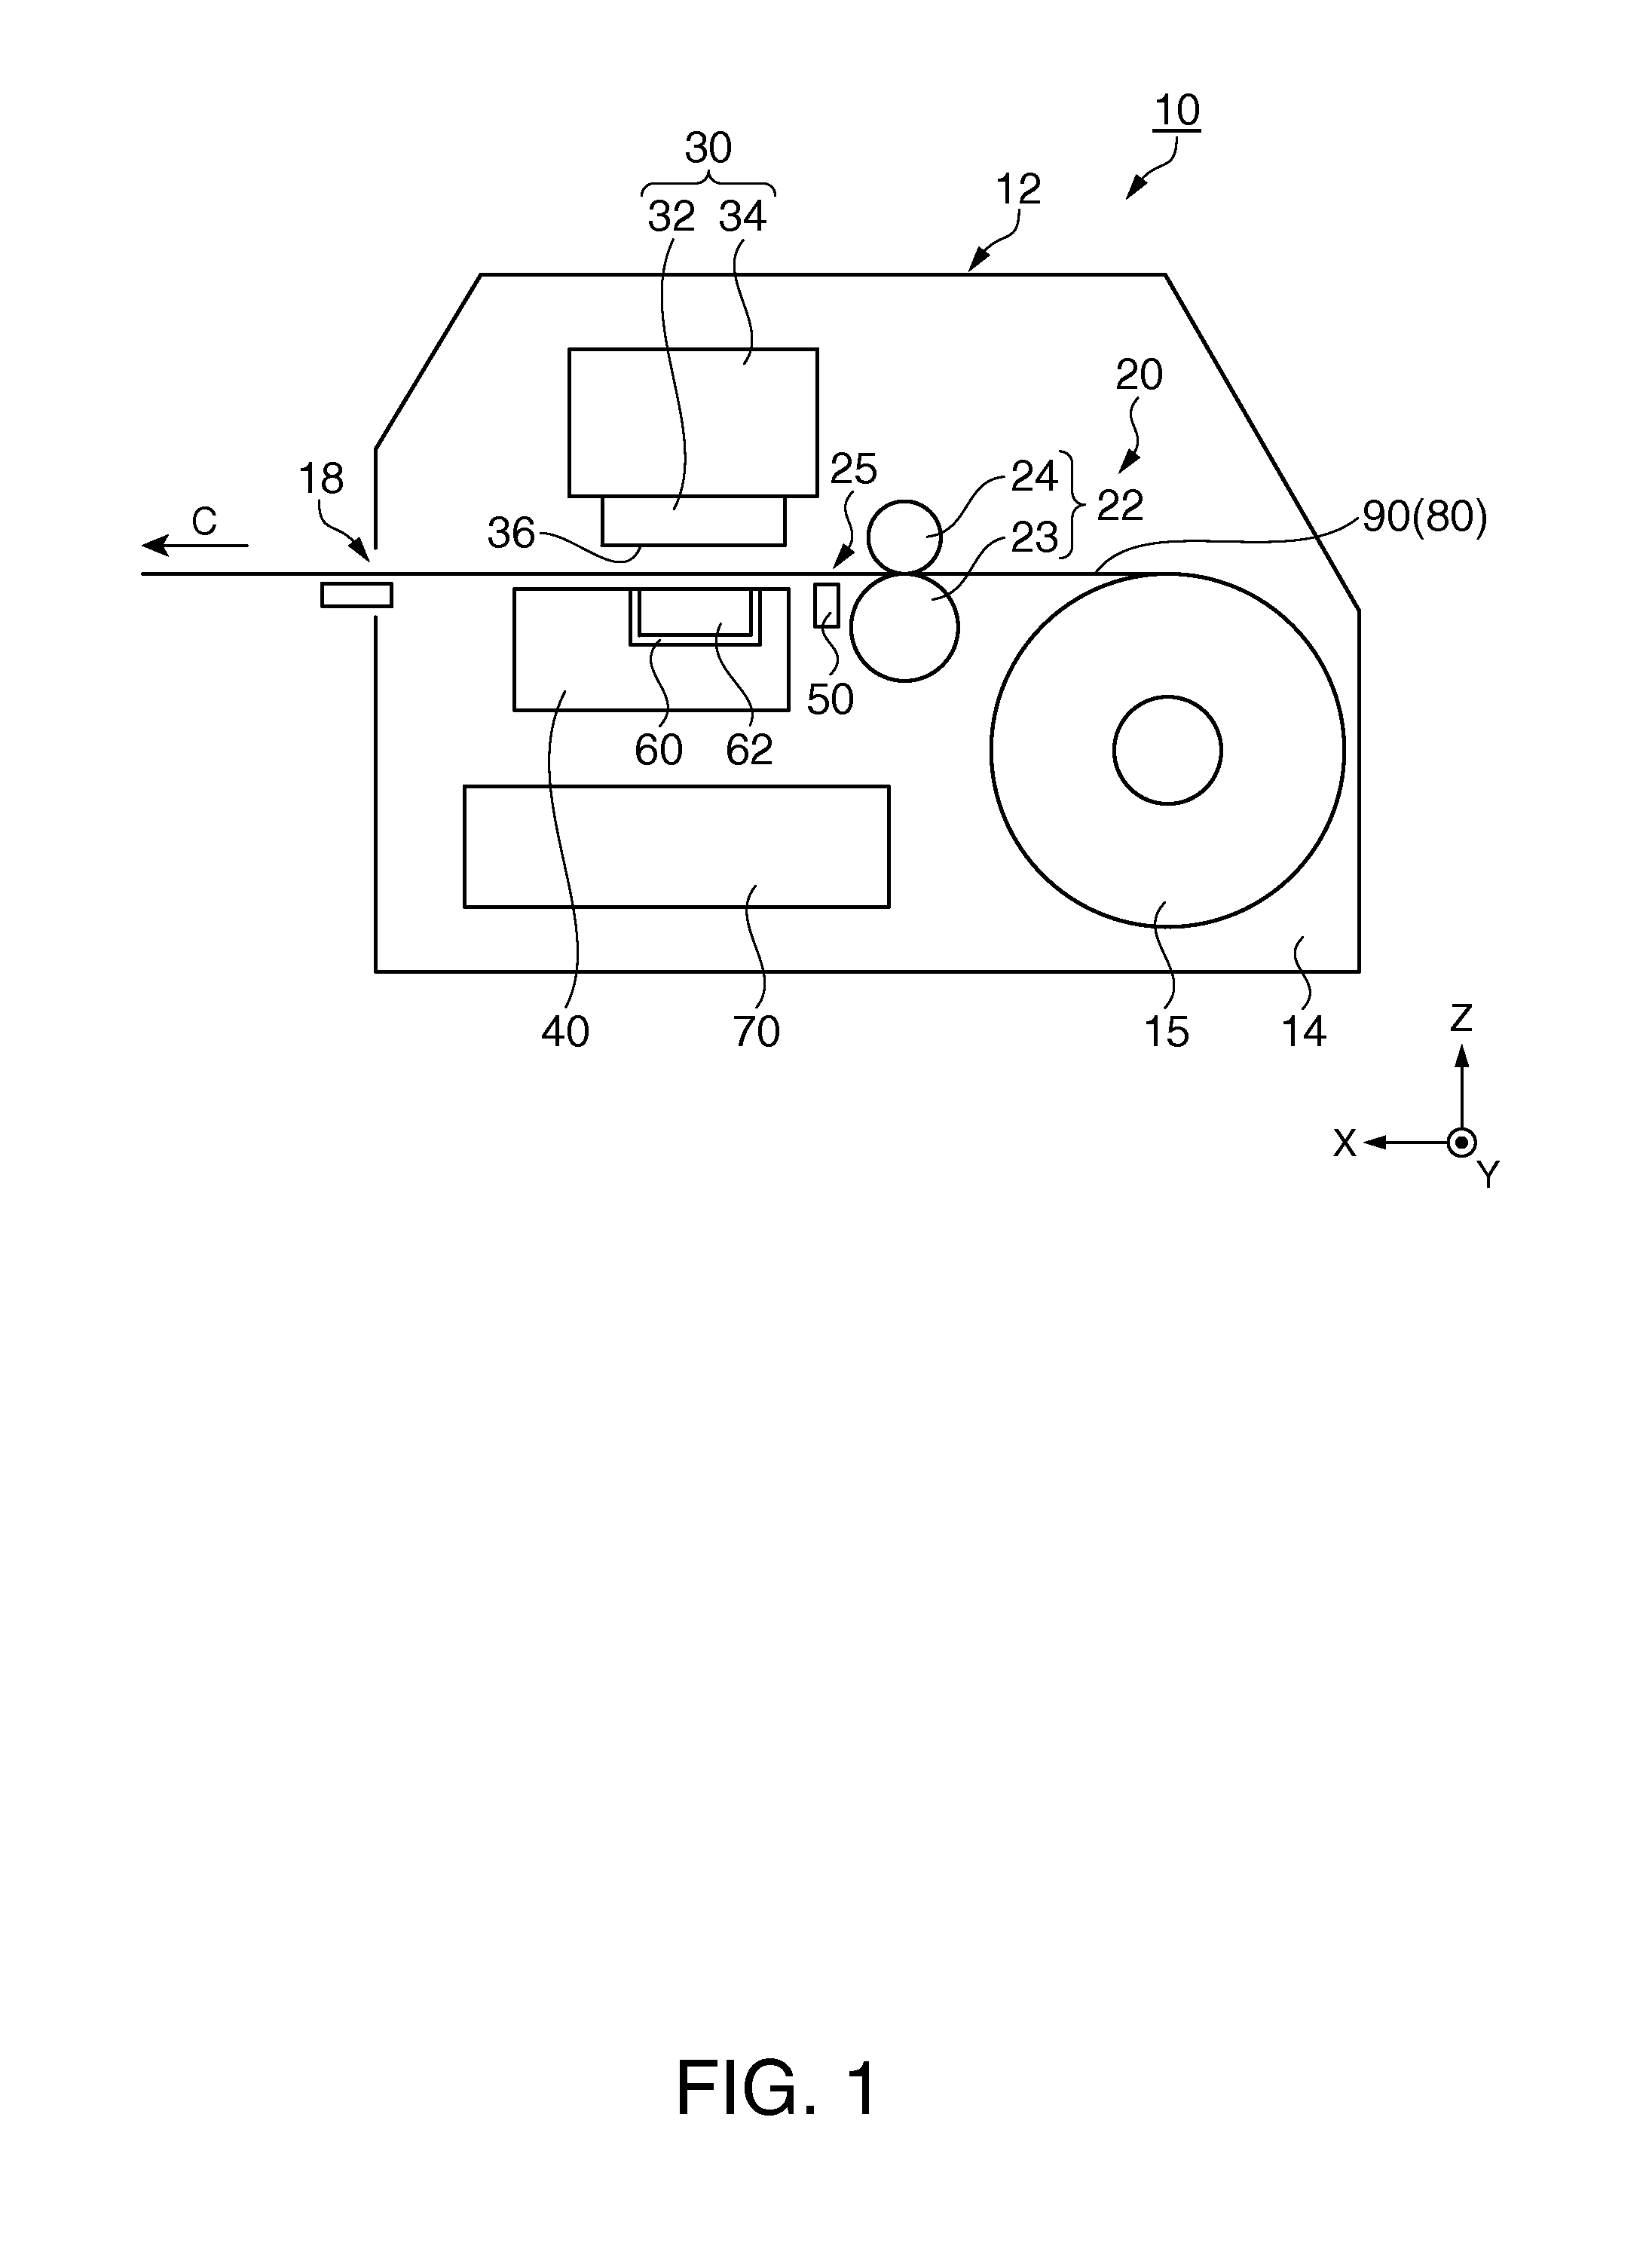 Paper used in an inkjet printer, and preliminary ejection method for an inkjet printer